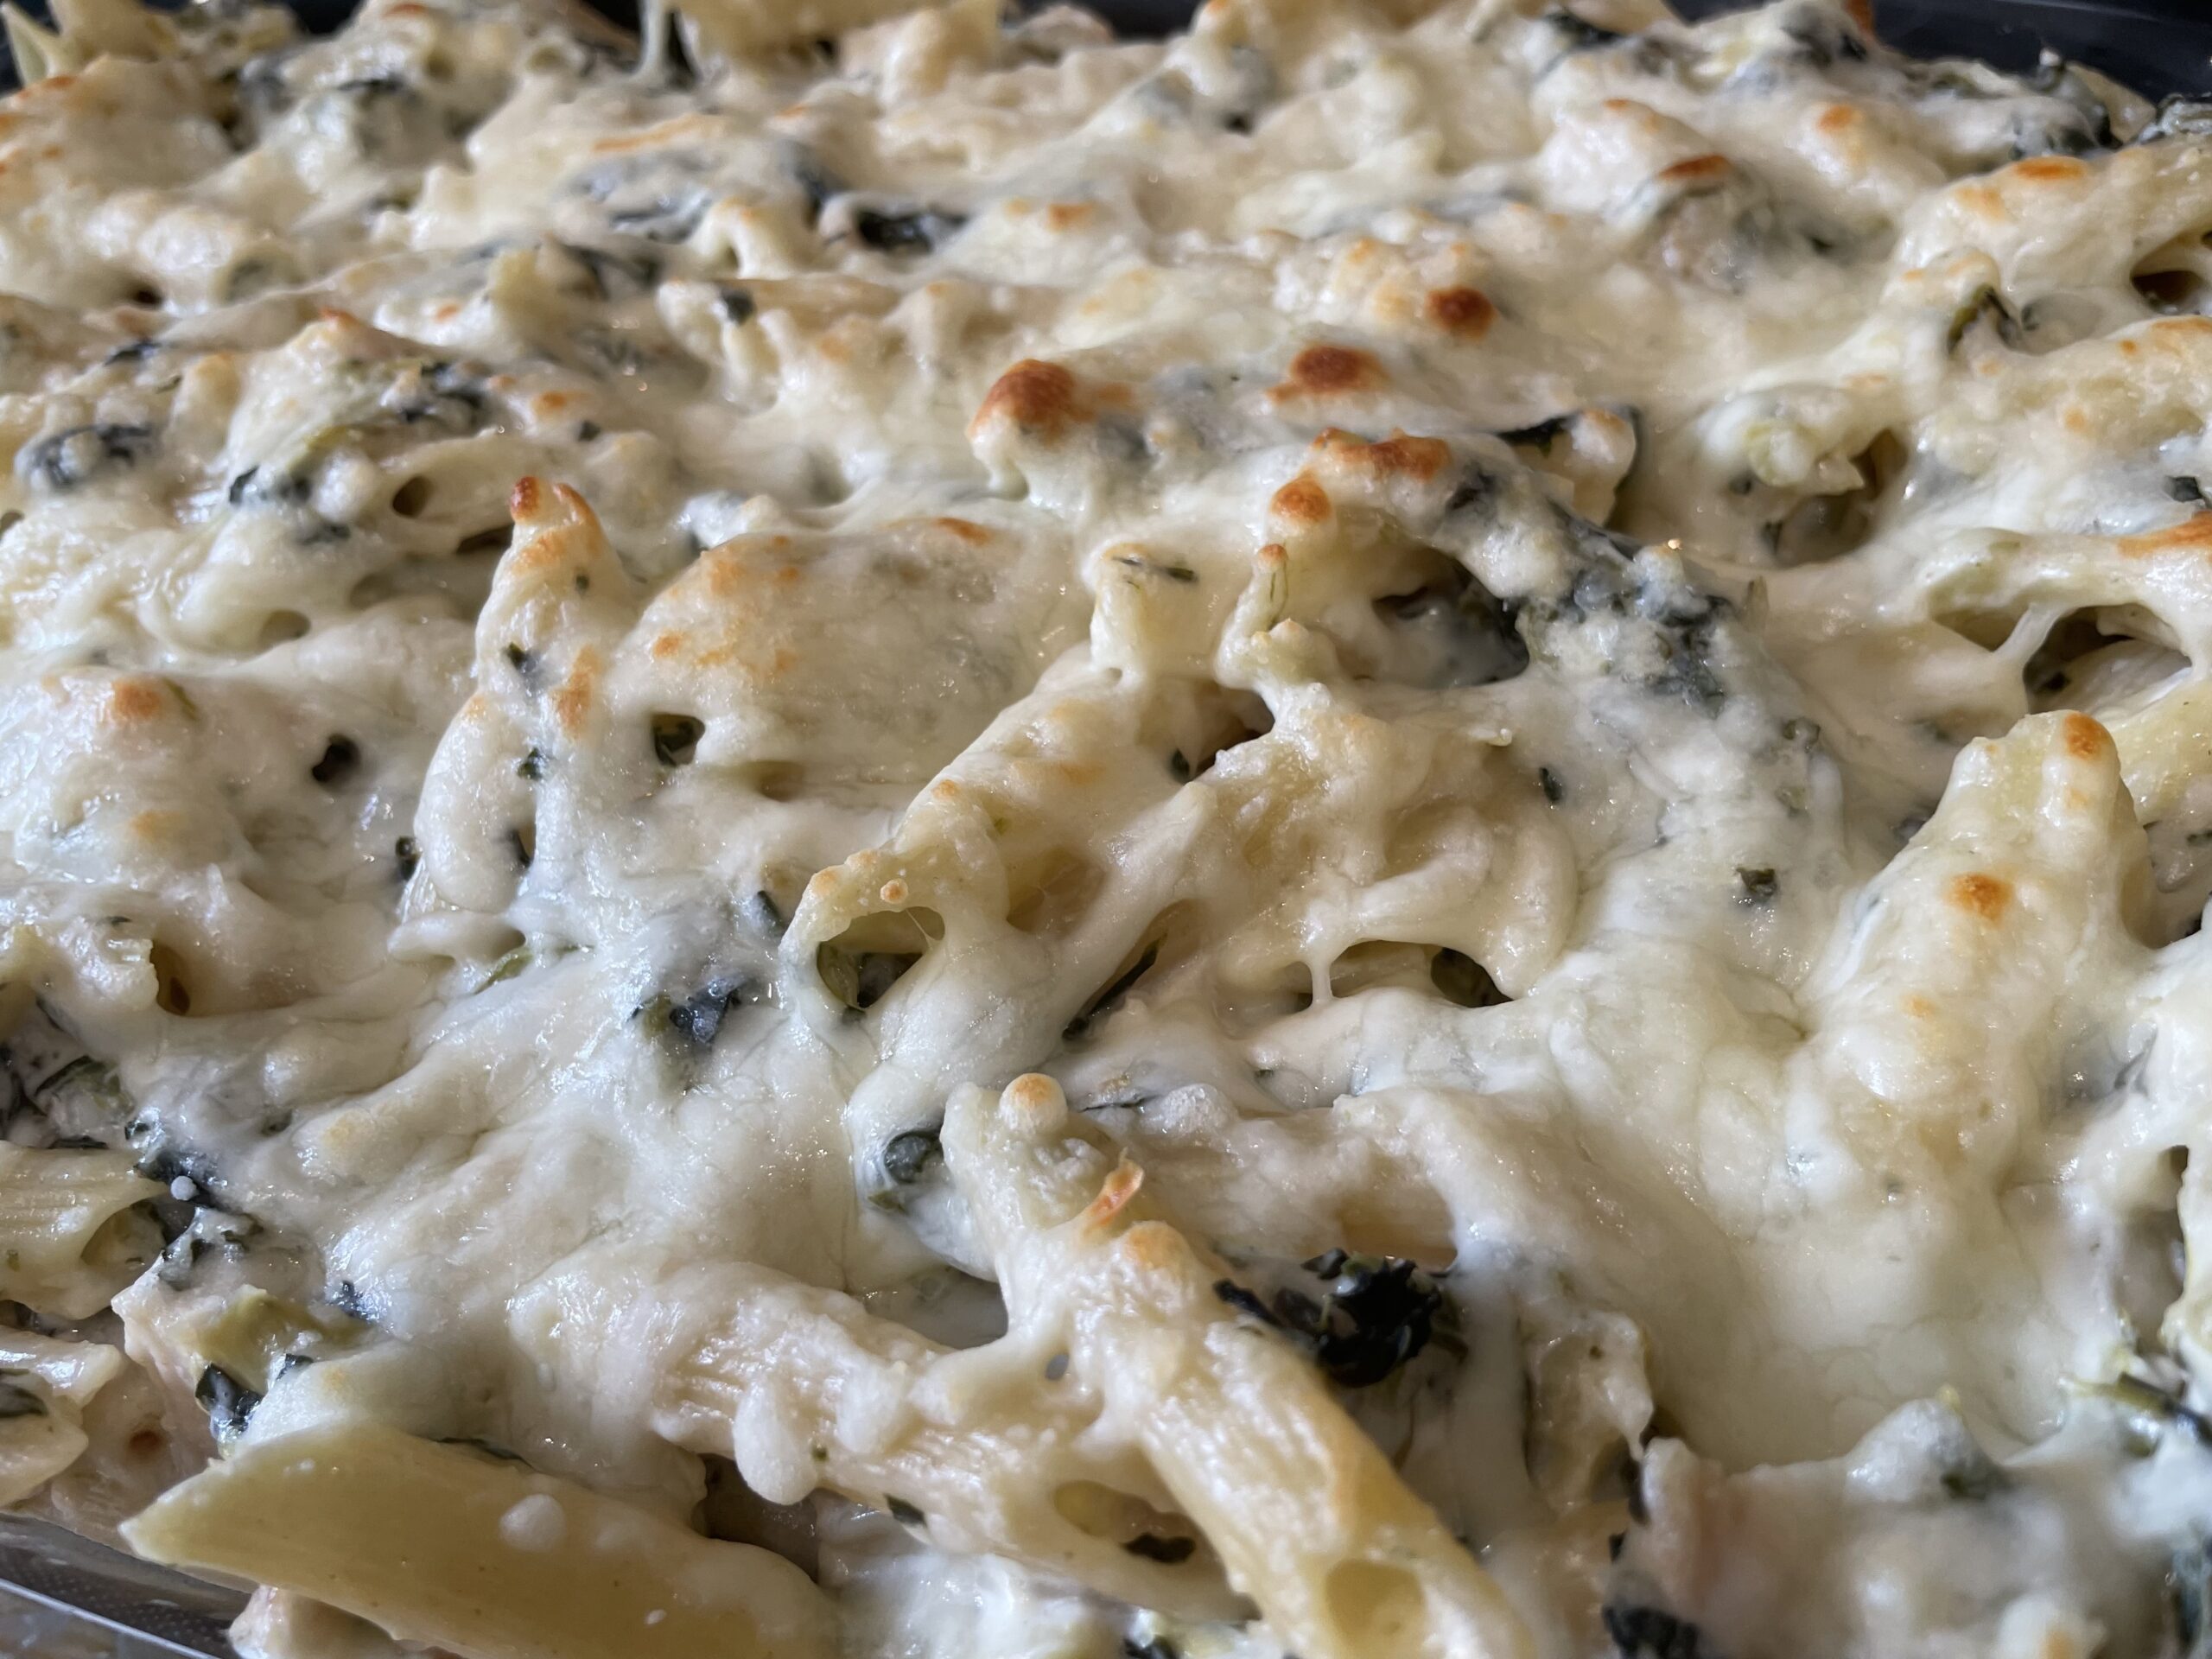 Baked Spinach Artichoke Pasta